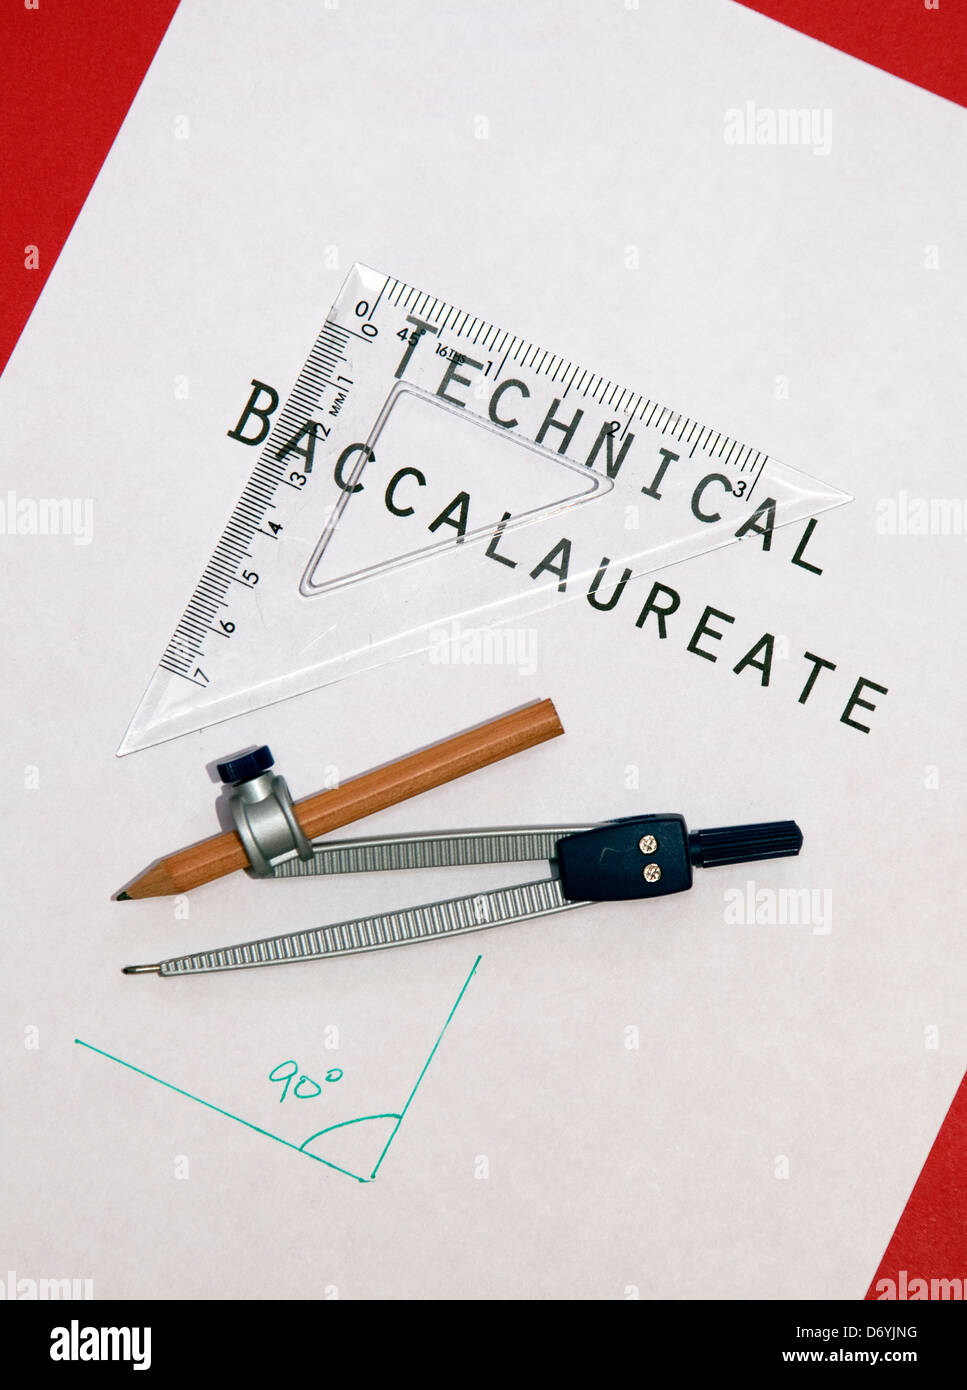 Government proposes new Technical Baccalaureate examination, London Stock Photo